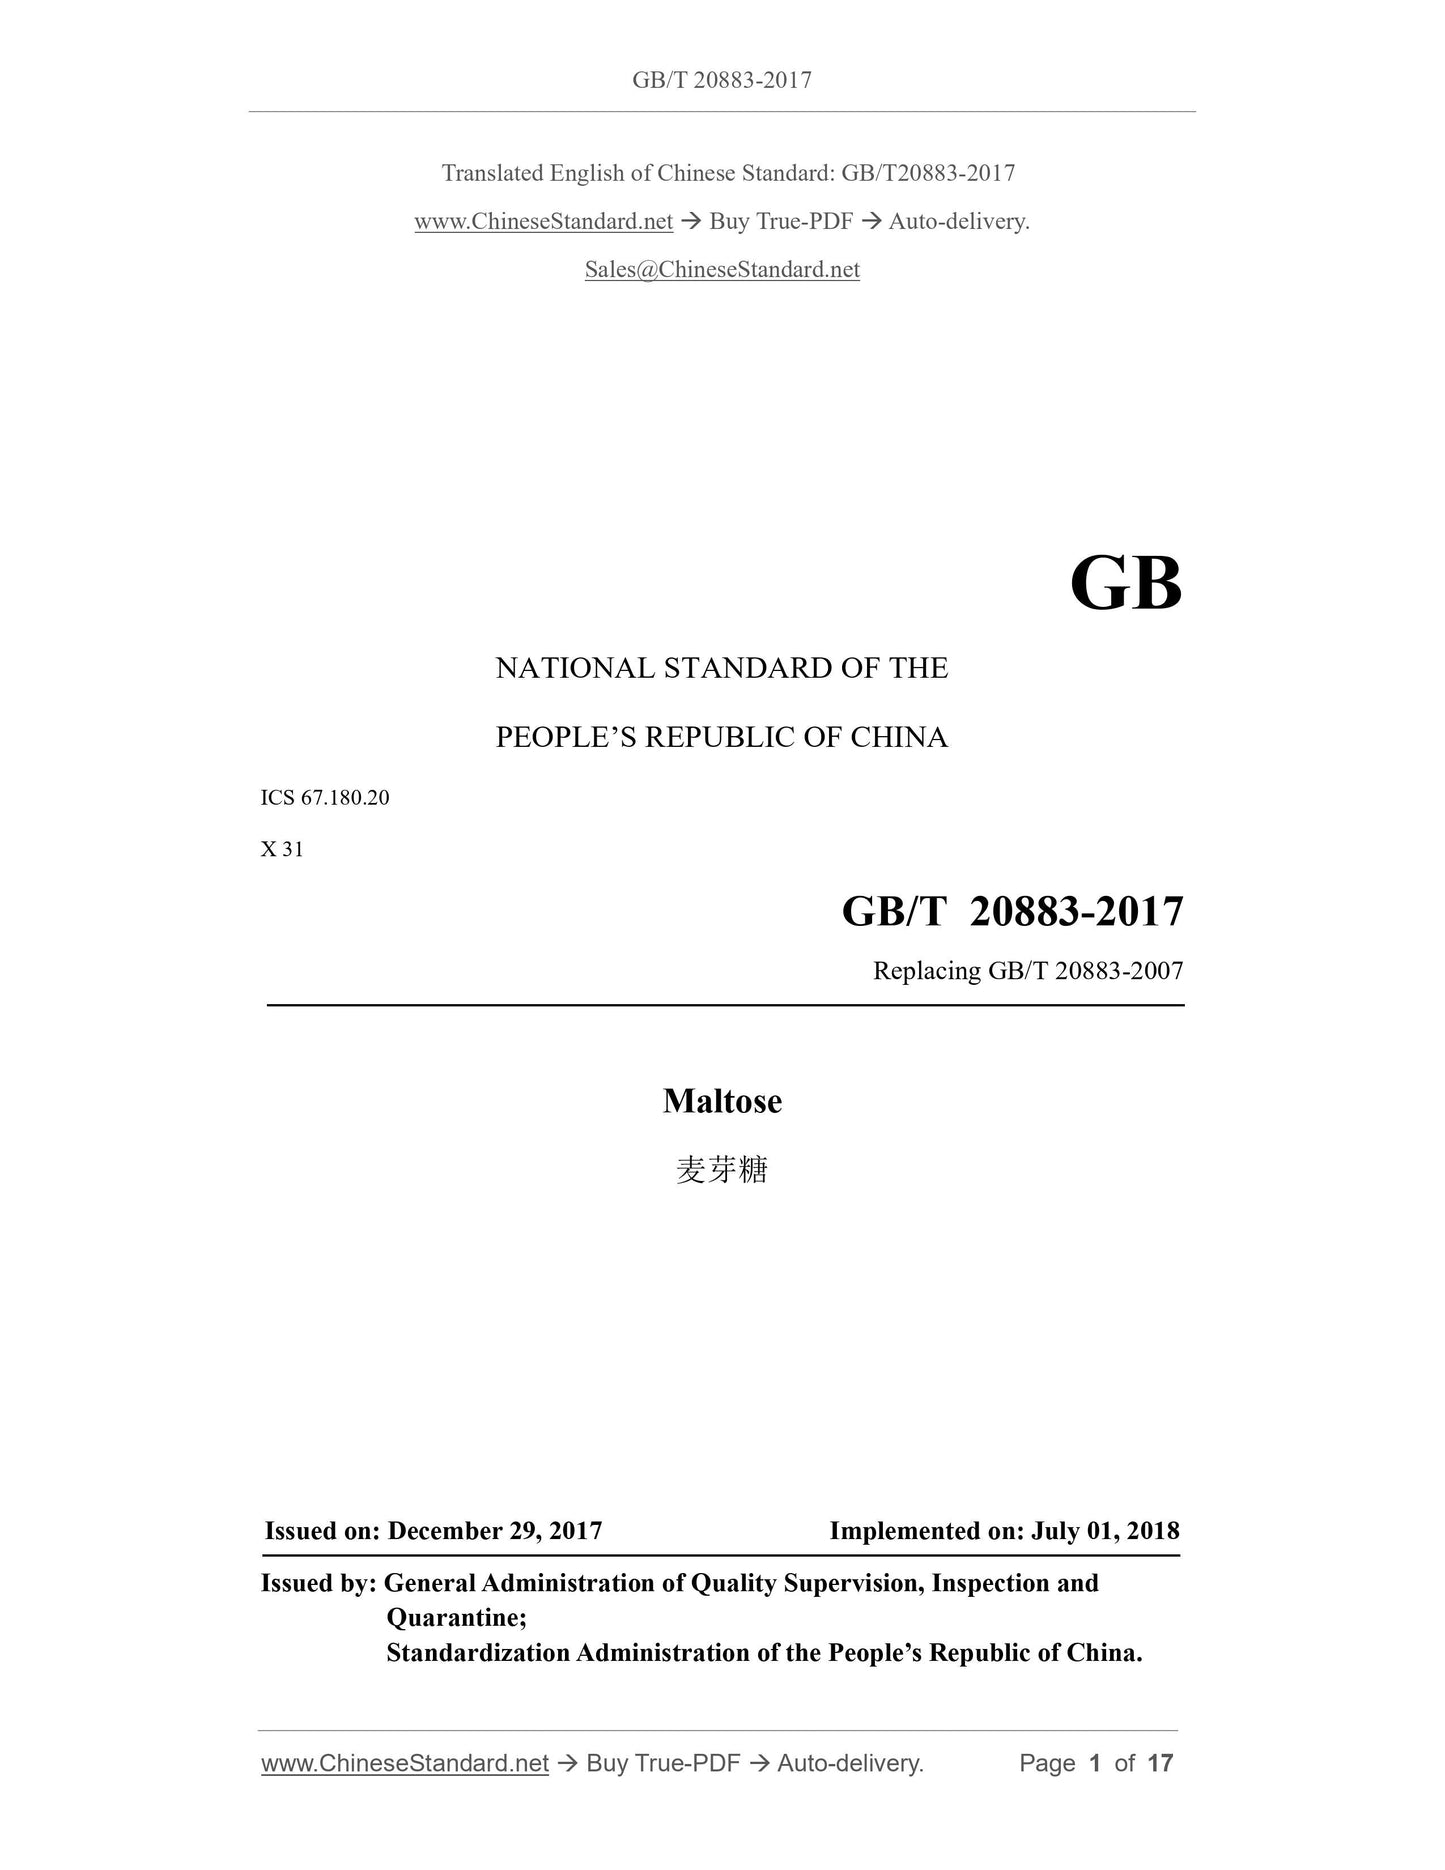 GB/T 20883-2017 Page 1